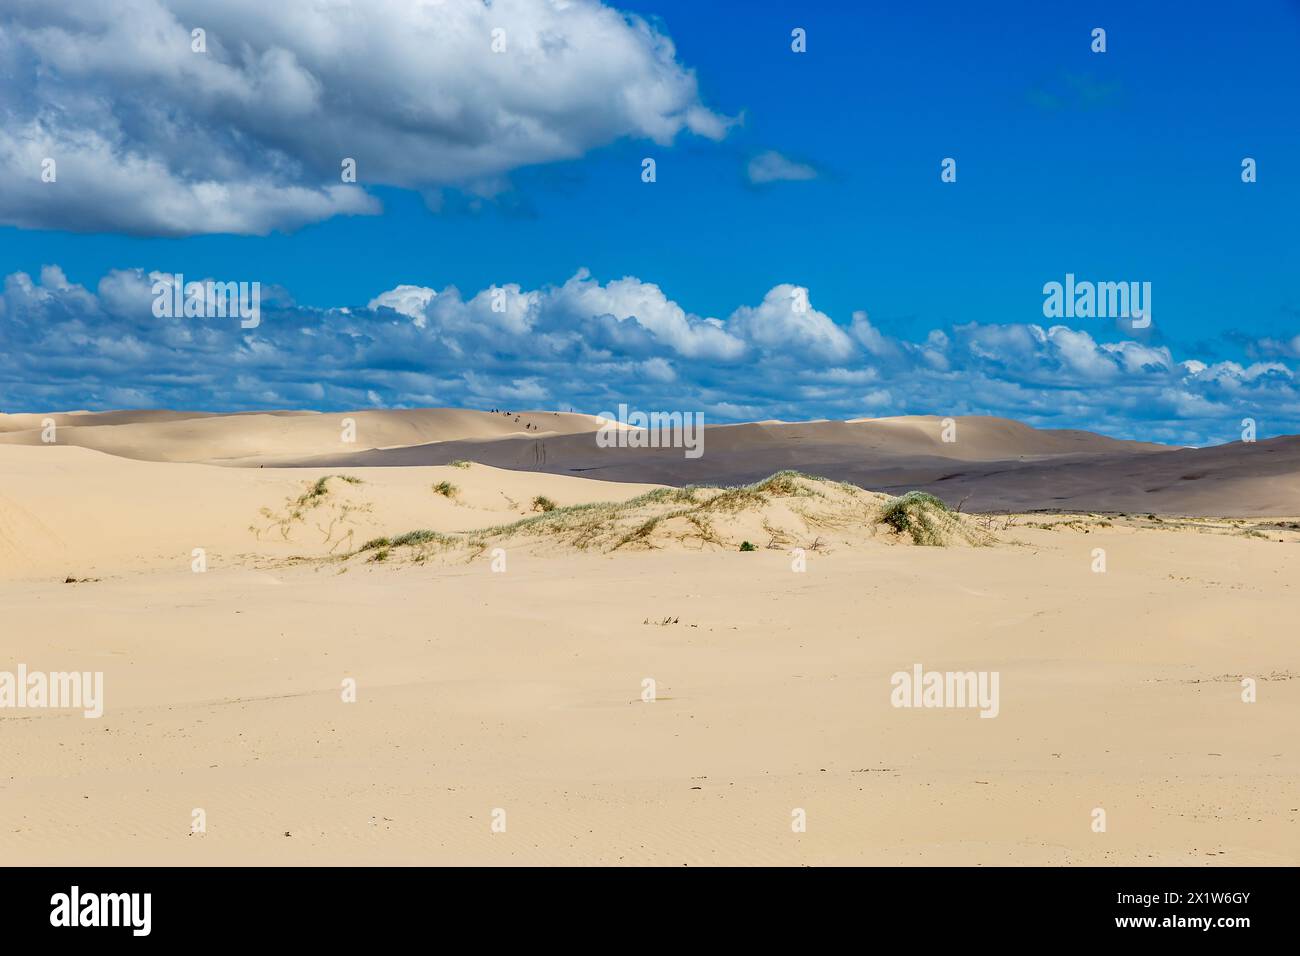 Sand Dunes at Stockton Beach with Sandboarding People in the Distance, New South Wales, Australia. Stock Photo